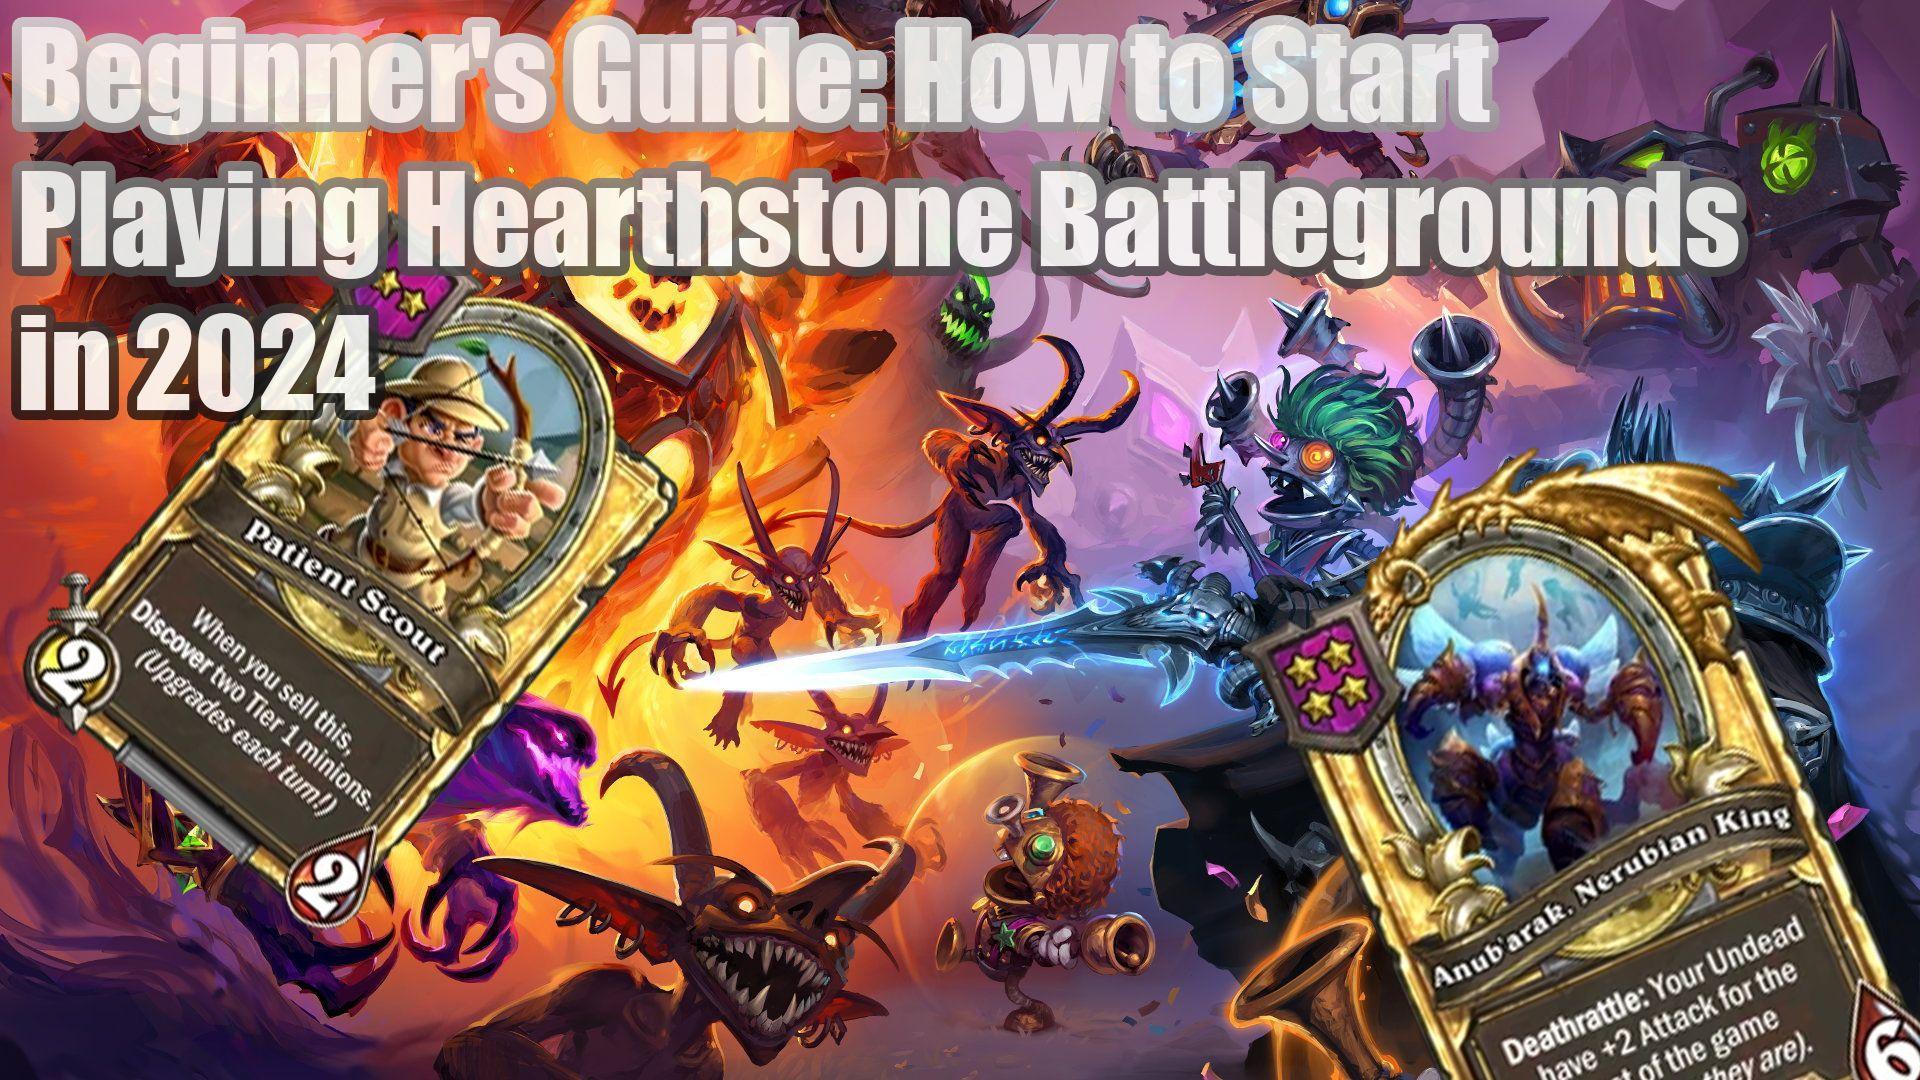 Beginner's Guide: How to Start Playing Hearthstone Battlegrounds in 2024